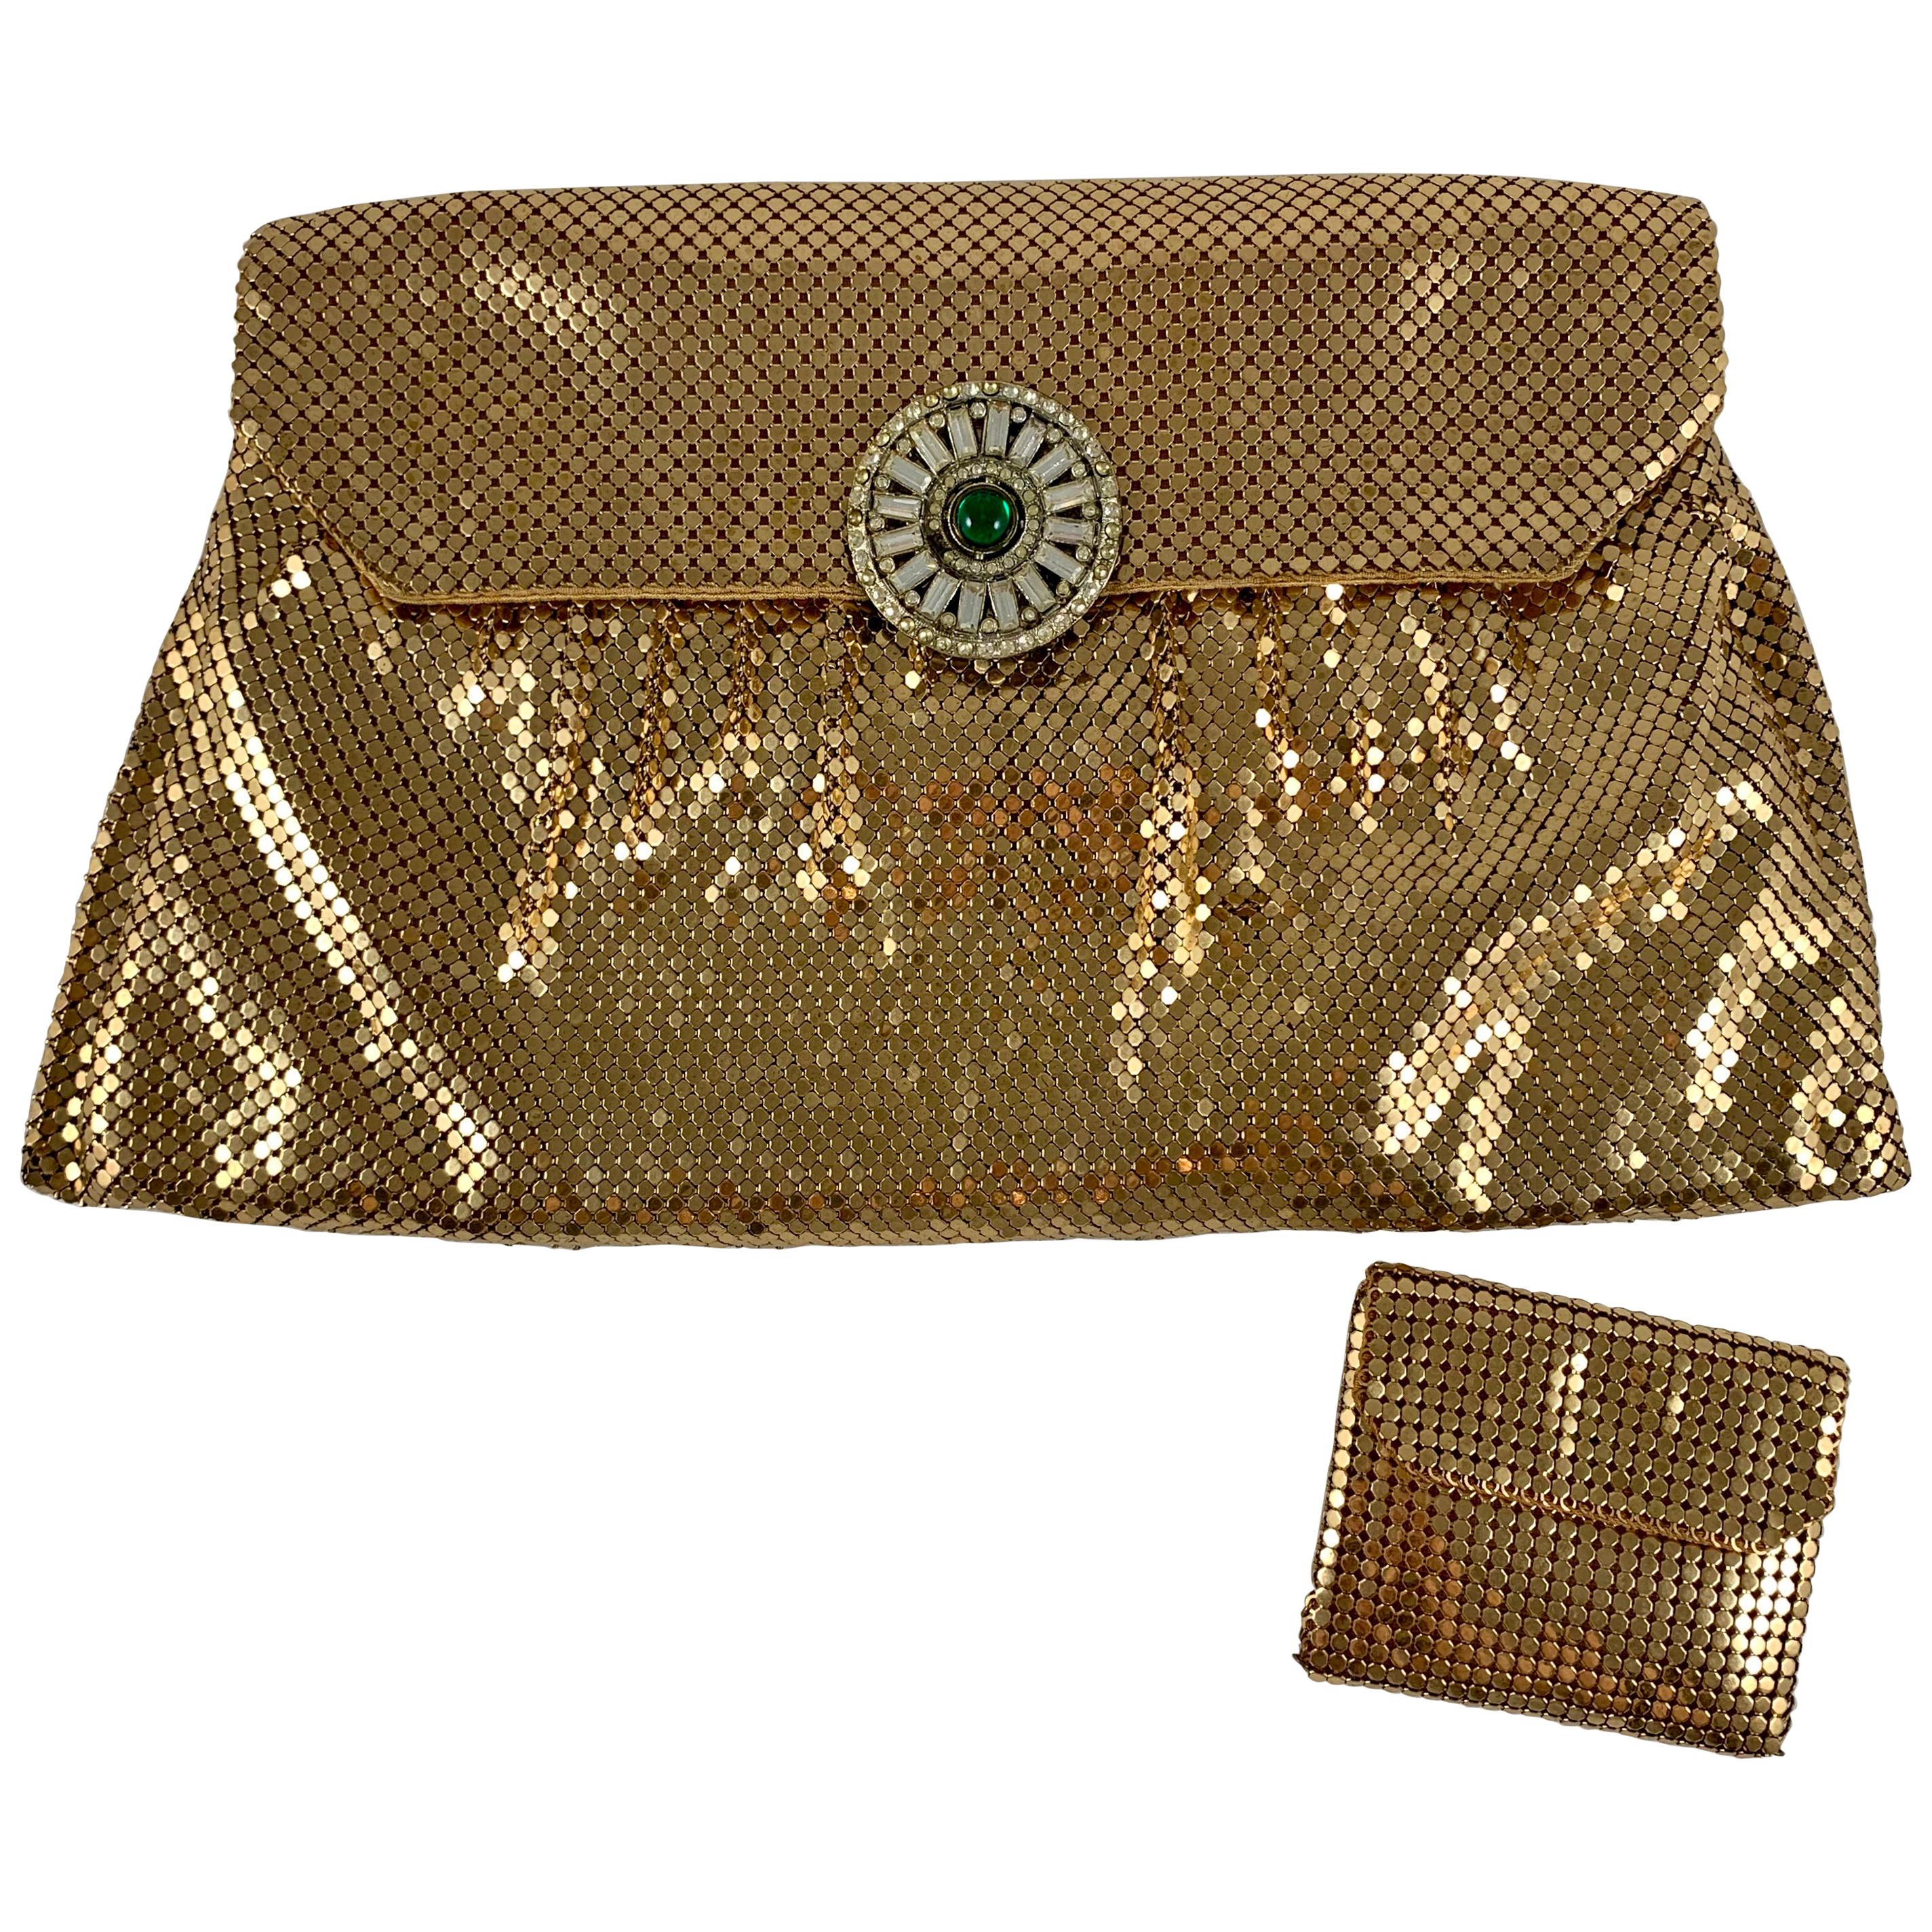 1950s Whiting and Davis Gold Mesh Jewel Closure Evening Clutch with Coin Purse For Sale